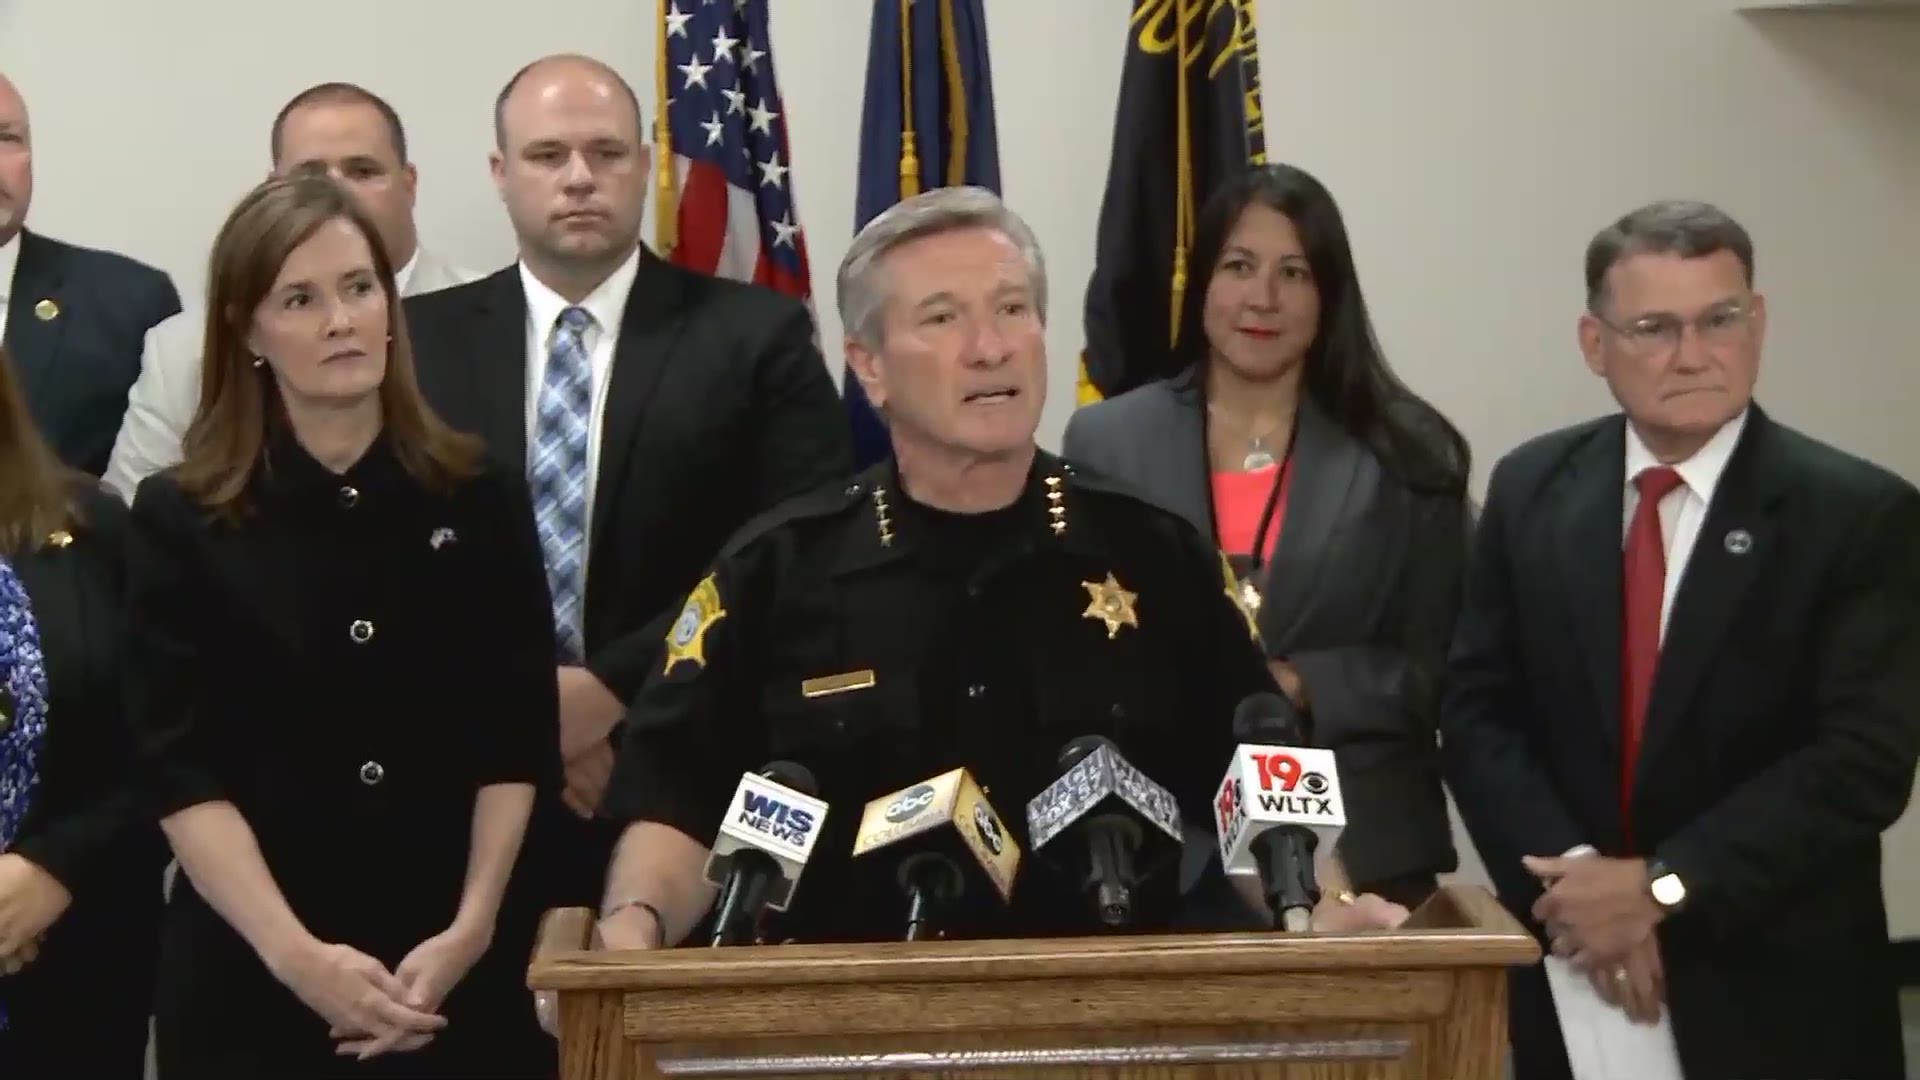 Richland Sheriff Leon Lott detailed the results of a four-day child sex sting that netted over three dozen arrests in South Carolina.